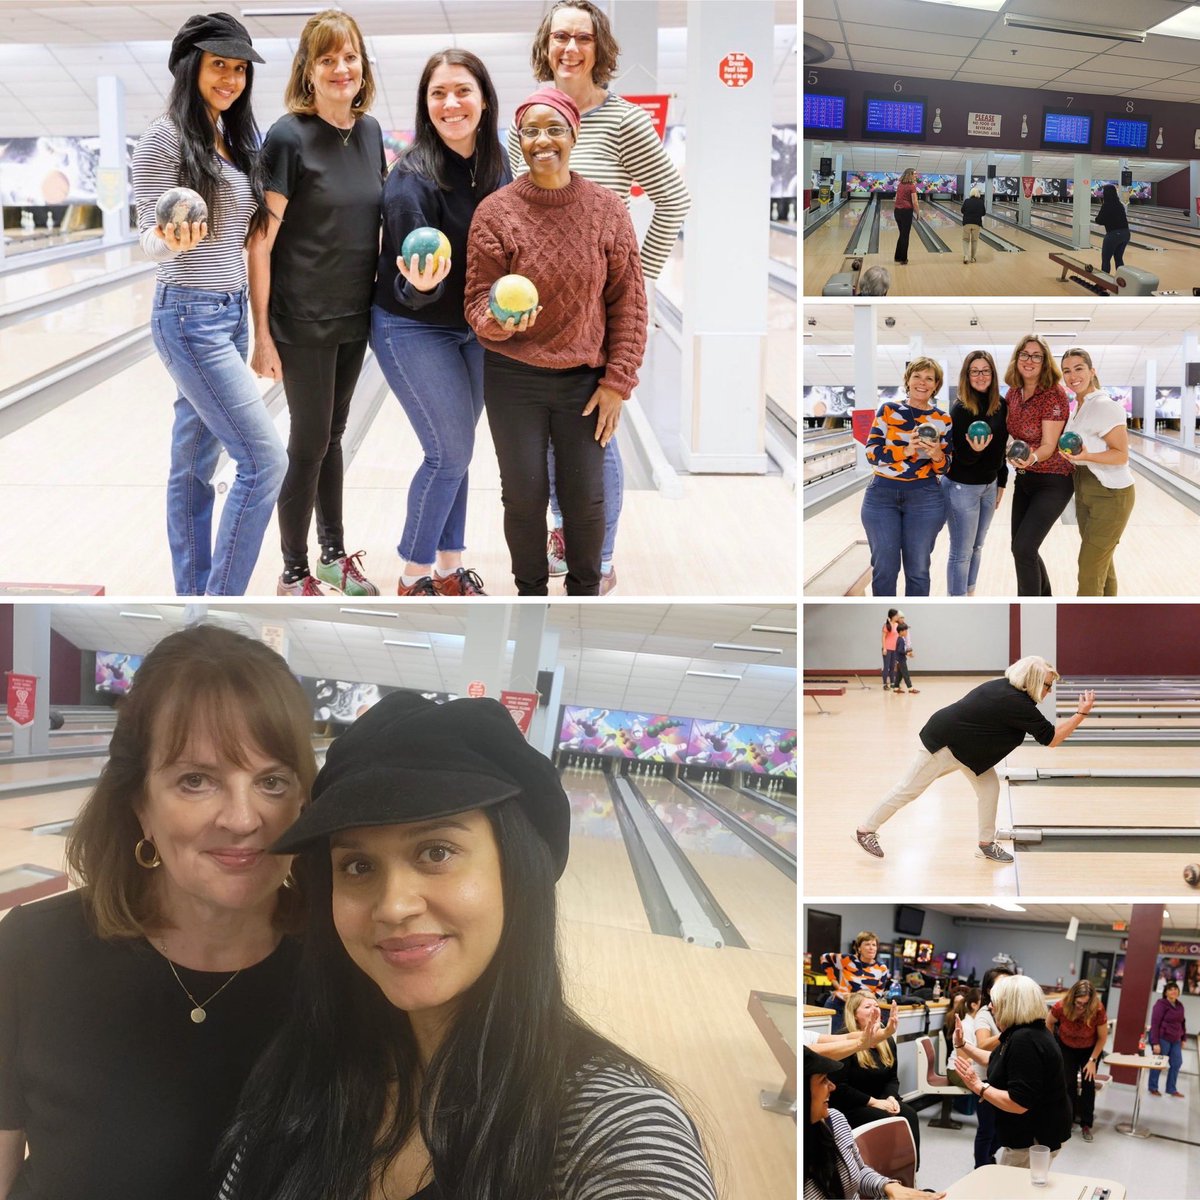 Fun time getting together with the @ZontaOakville ladies for some bowling. Physical activity and socializing is always great for your #mentalhealth. 

#StayPositiveAndStartBelieving @yourtvhalton #HealthyMindsHealthyLives #MentalHealthMatters #MentalWellness #Wellness